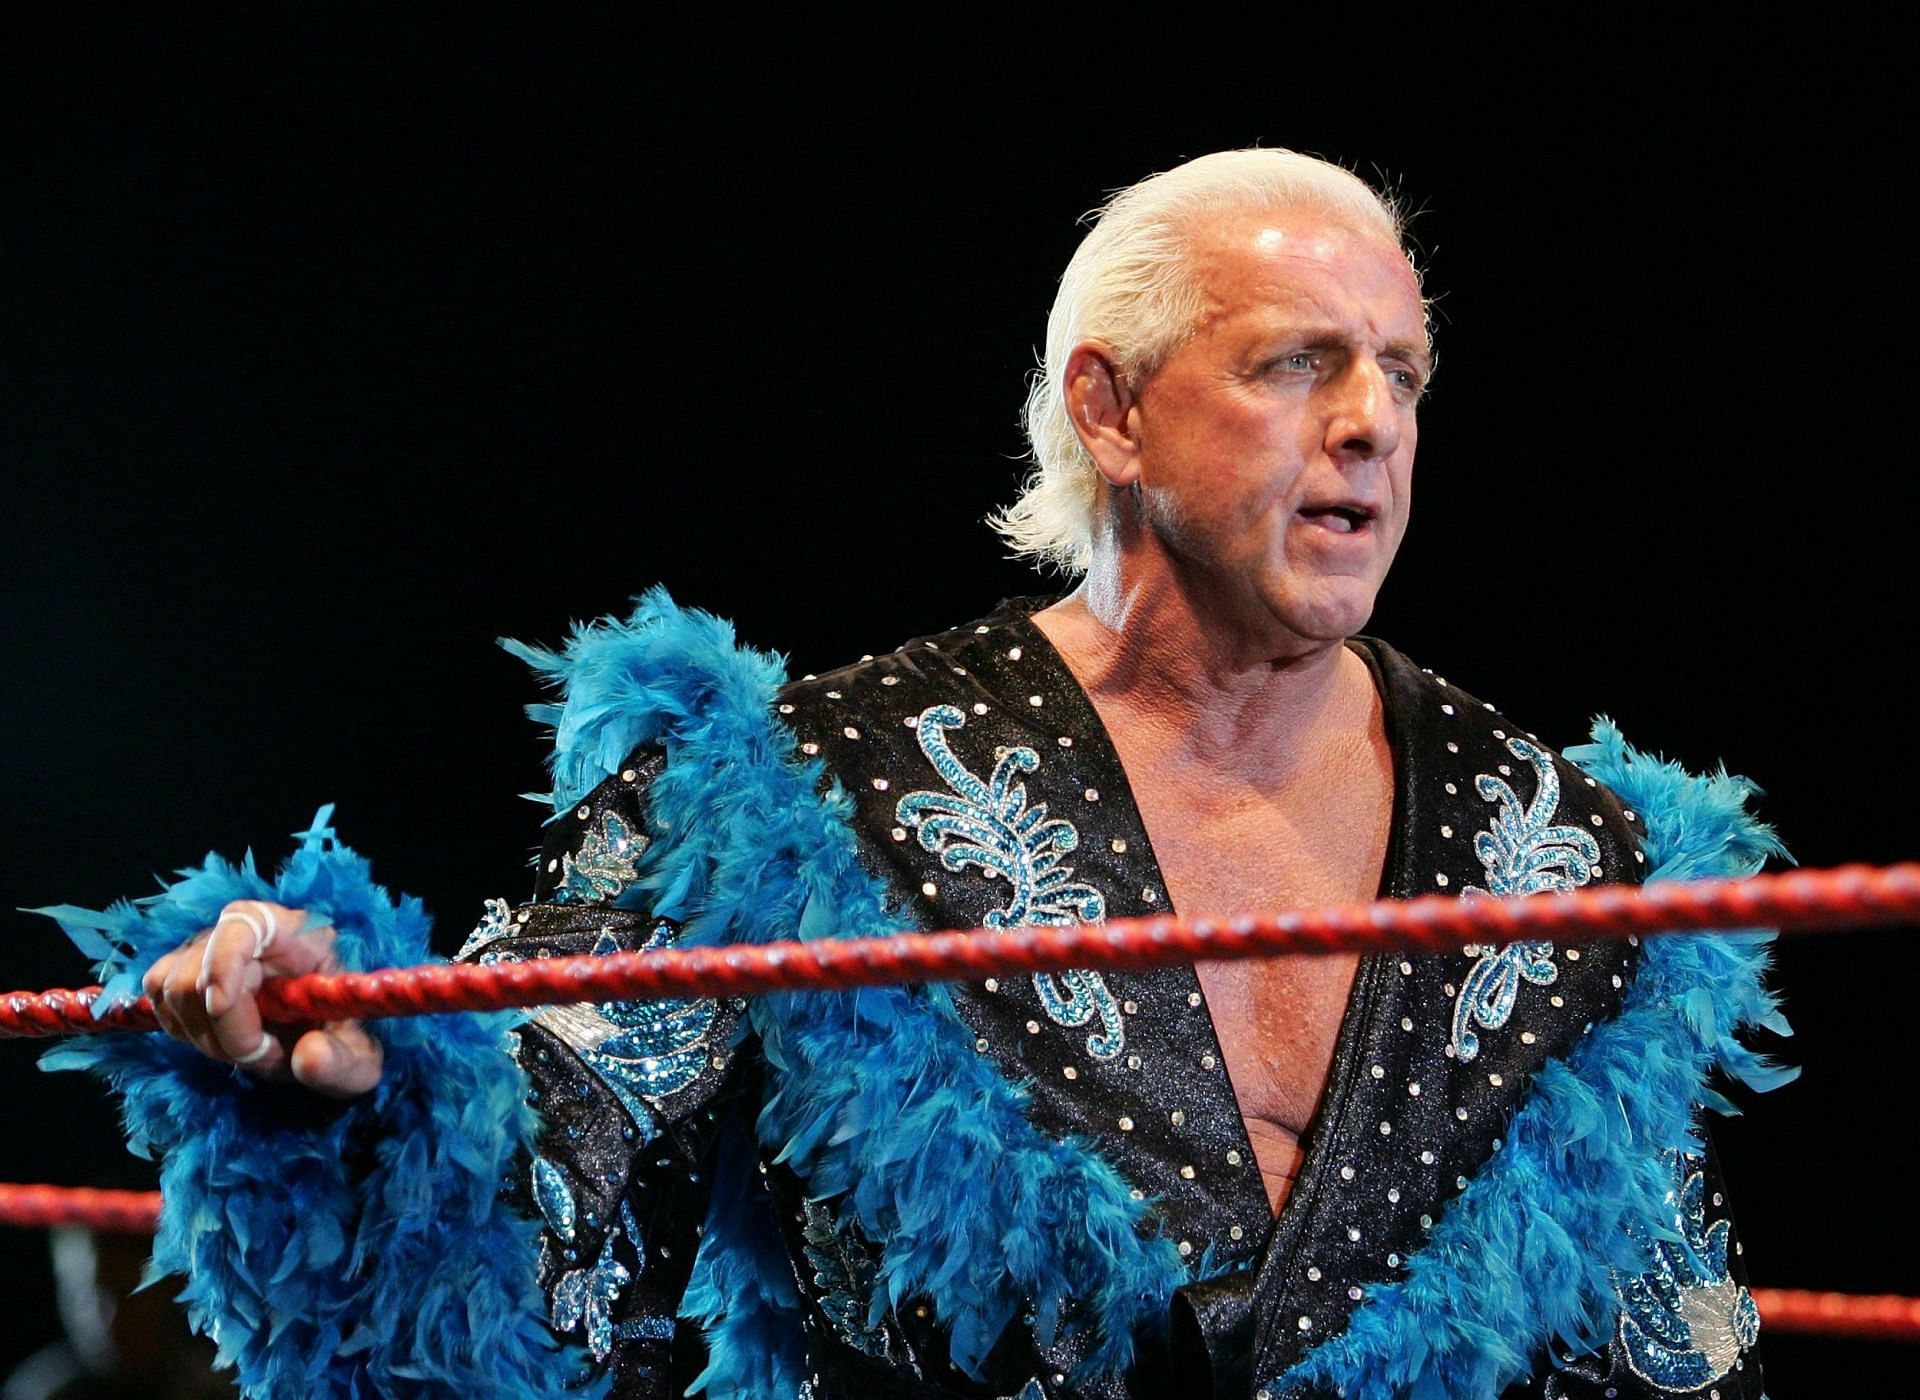 Has The Nature Boy found the perfect opponent for his last match?